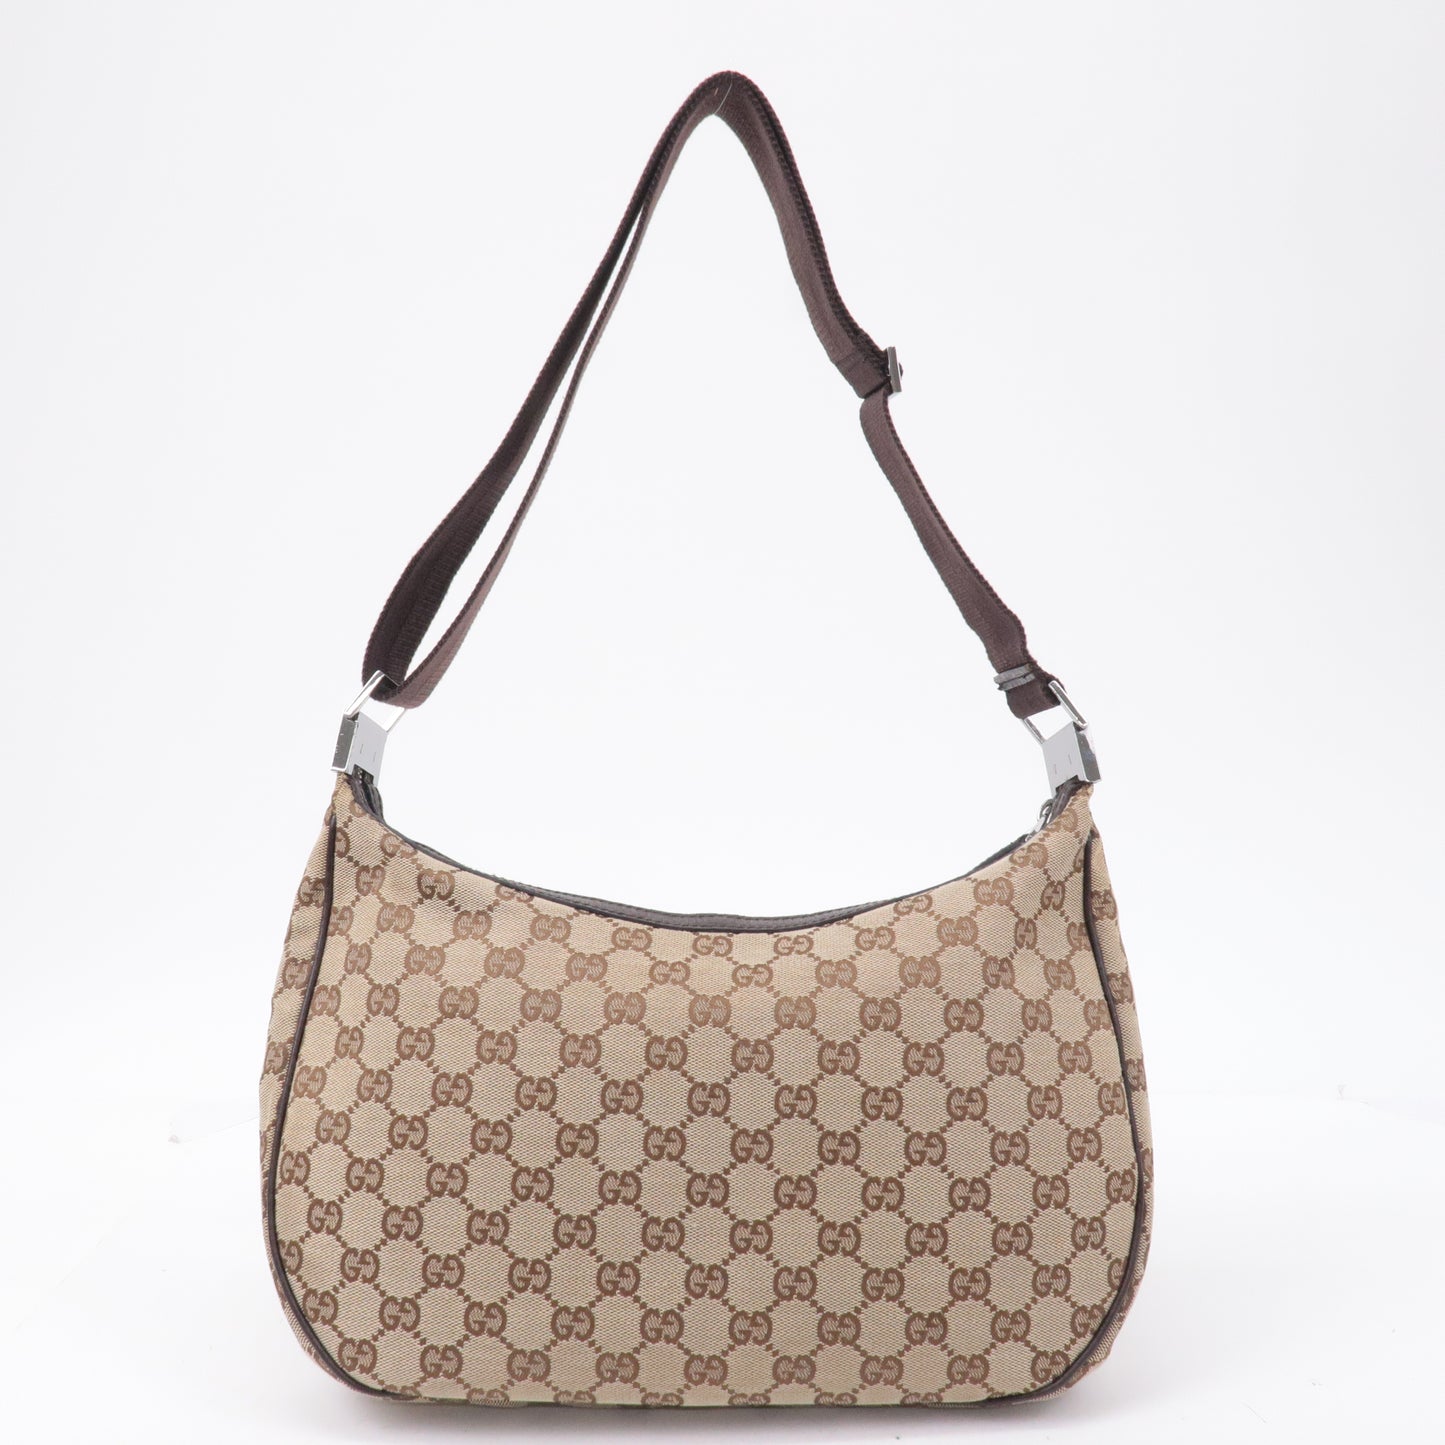 GUCCI GG Canvas Leather Shoulder Bag Cross Body Beige Brown 122790